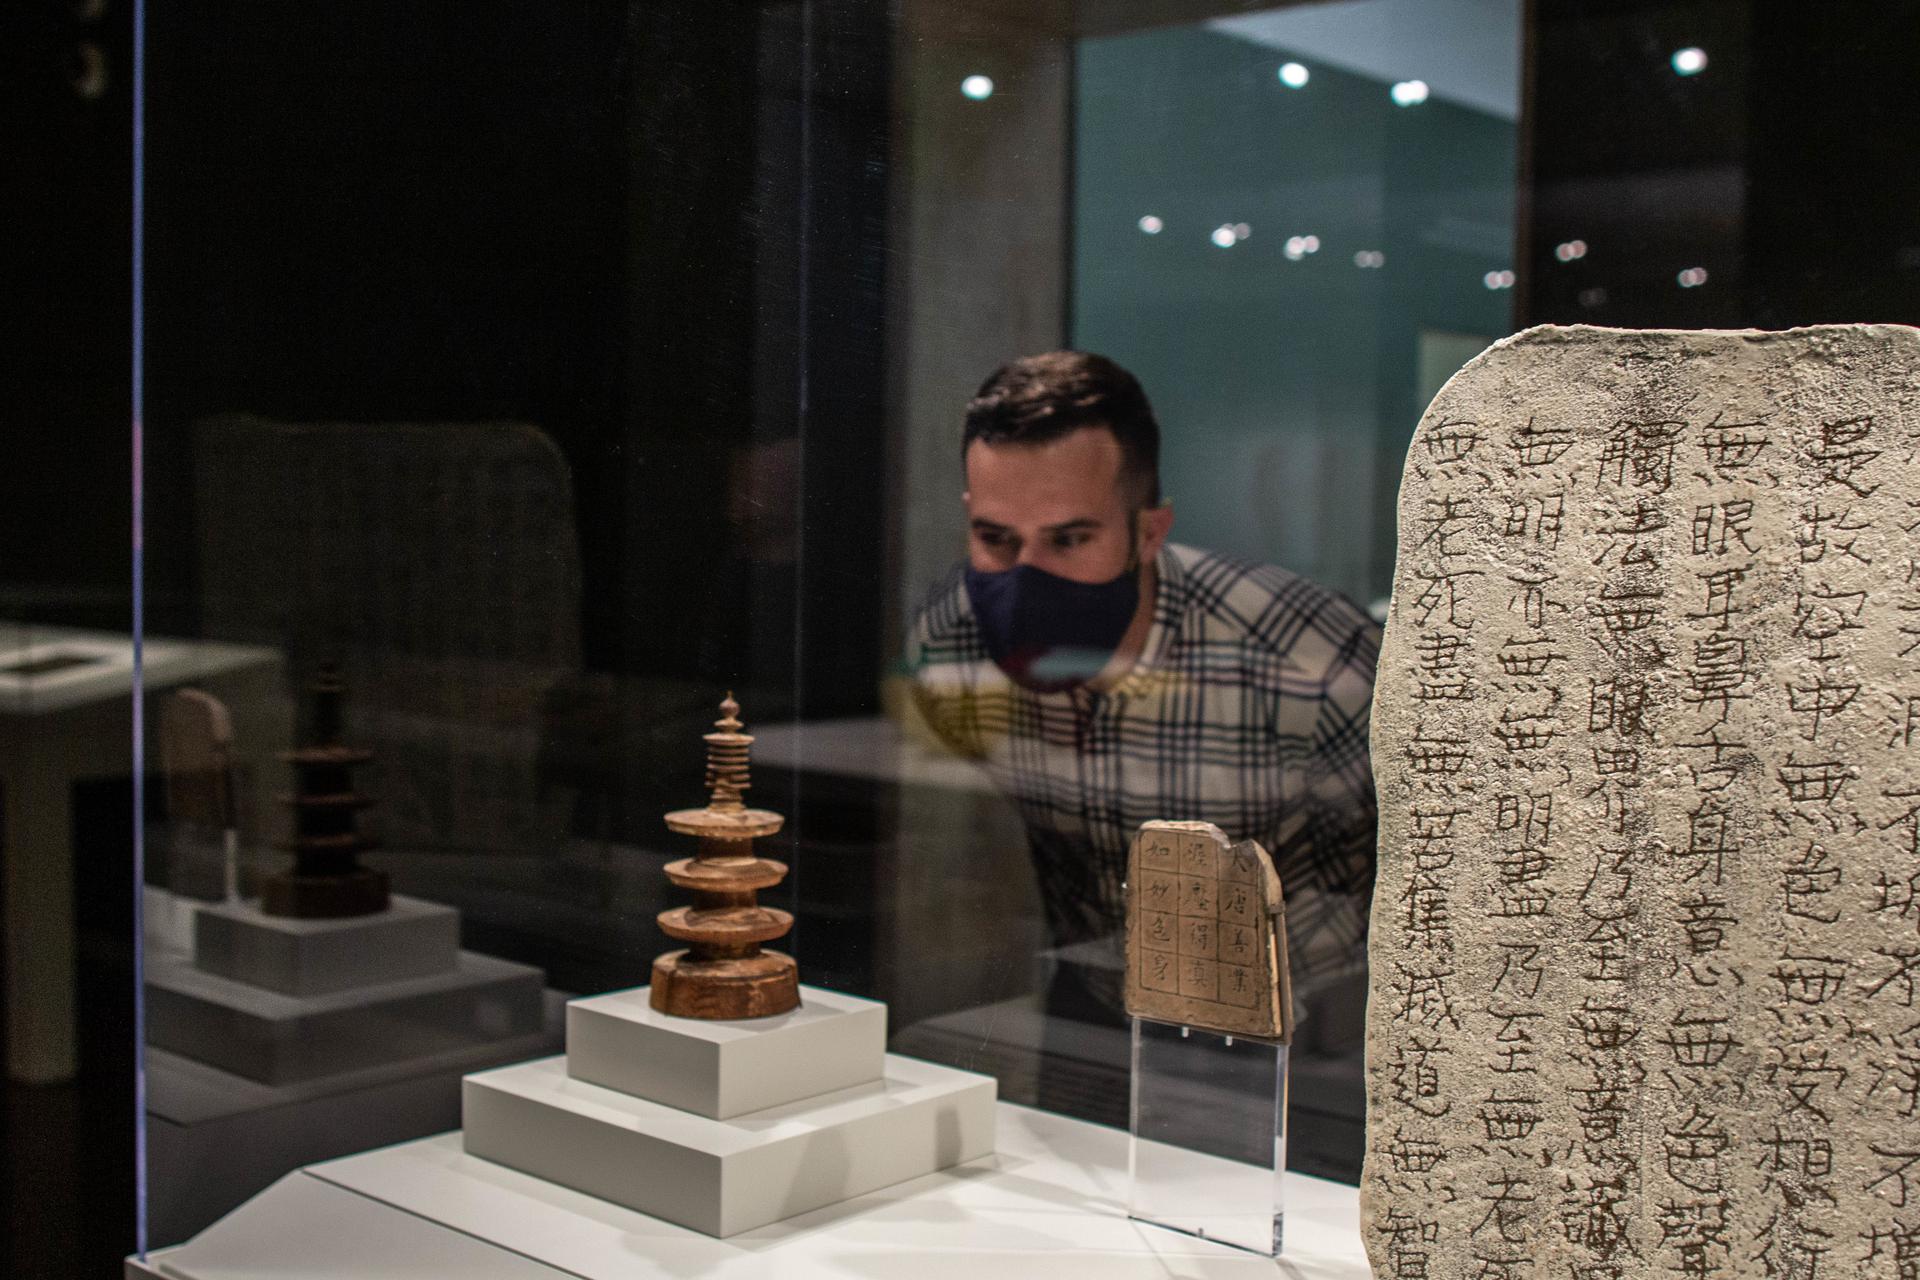 Image of a person wearing a mask looking at a lit paper sculpture installation by Barbara Earl Thomas